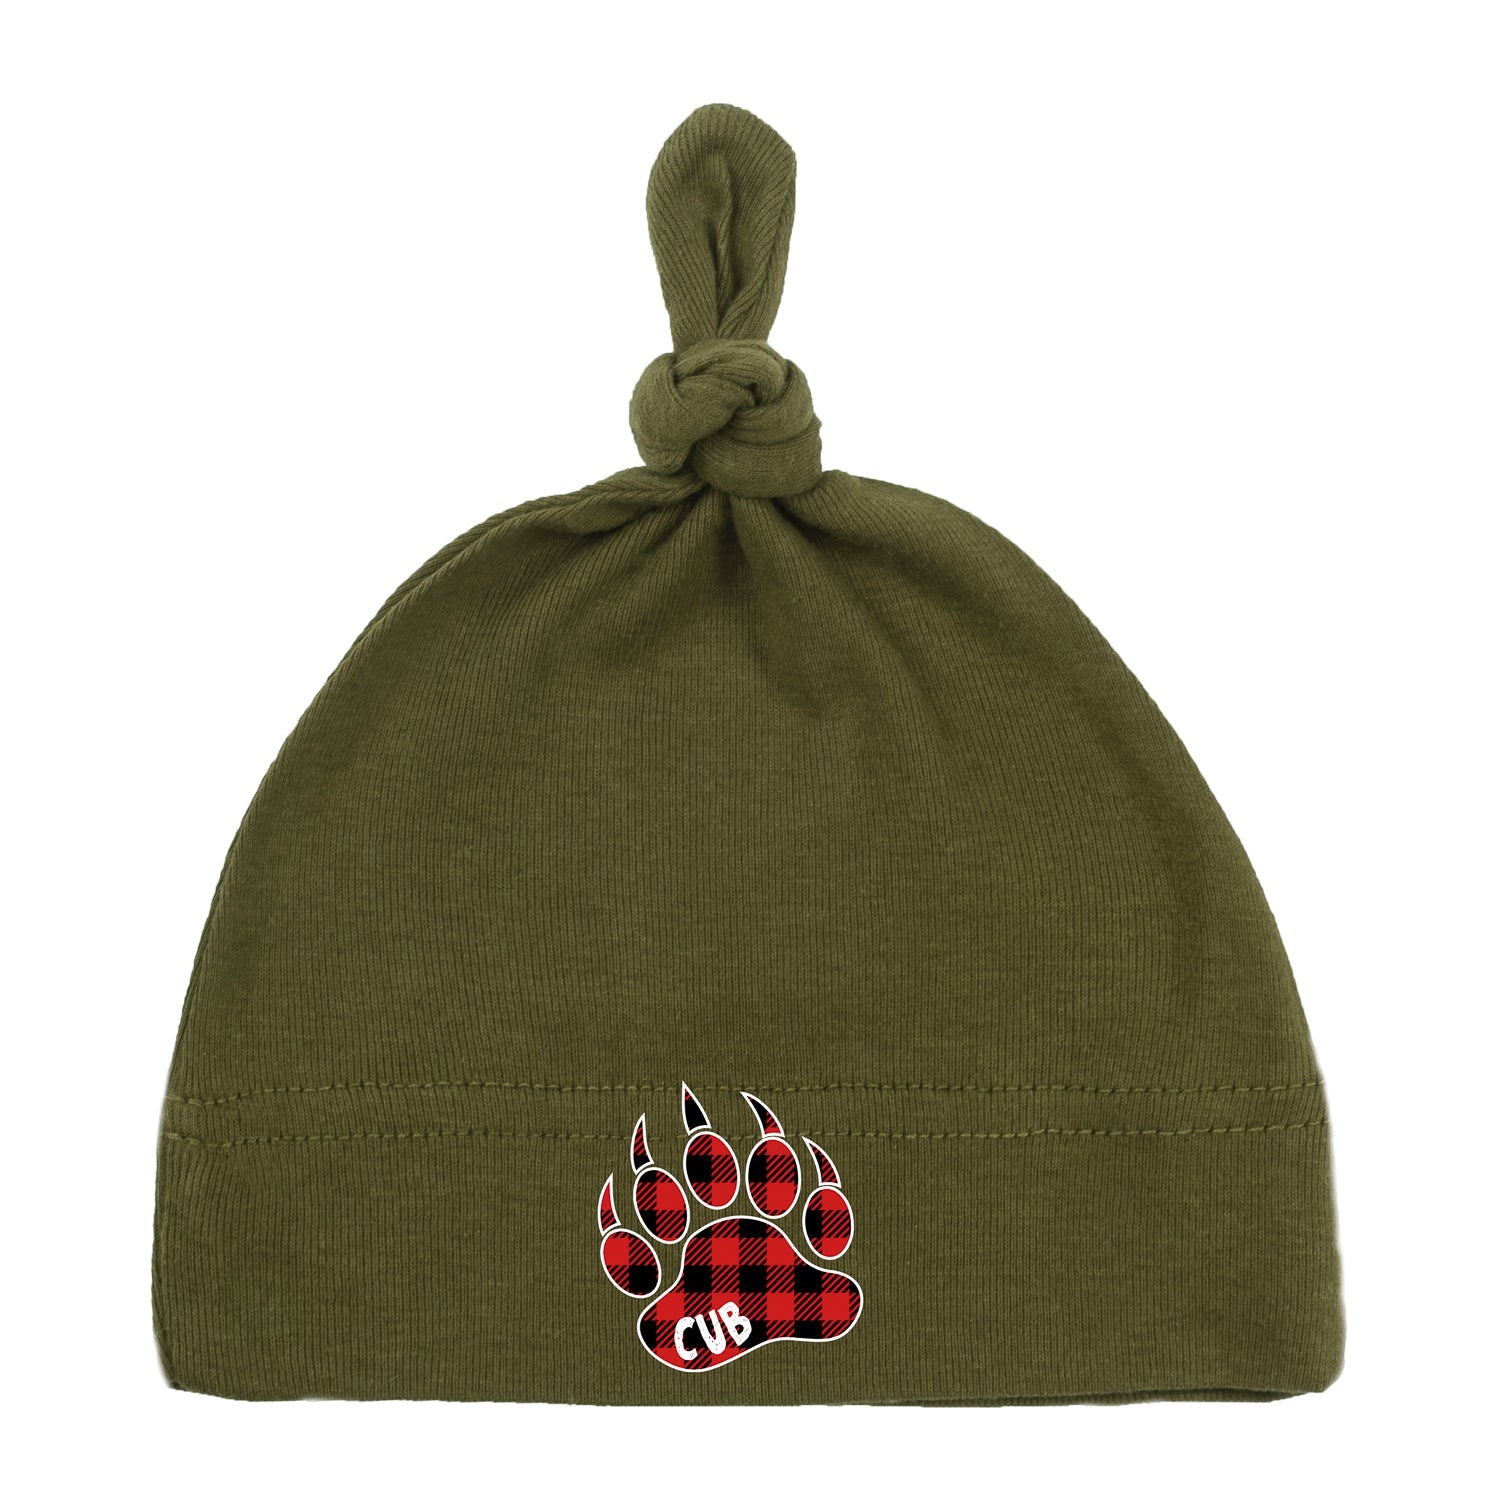 Cub Text in Buffalo Plaid Paw Print Baby Hat w/ Adjustable Top Knot - Mato & Hash